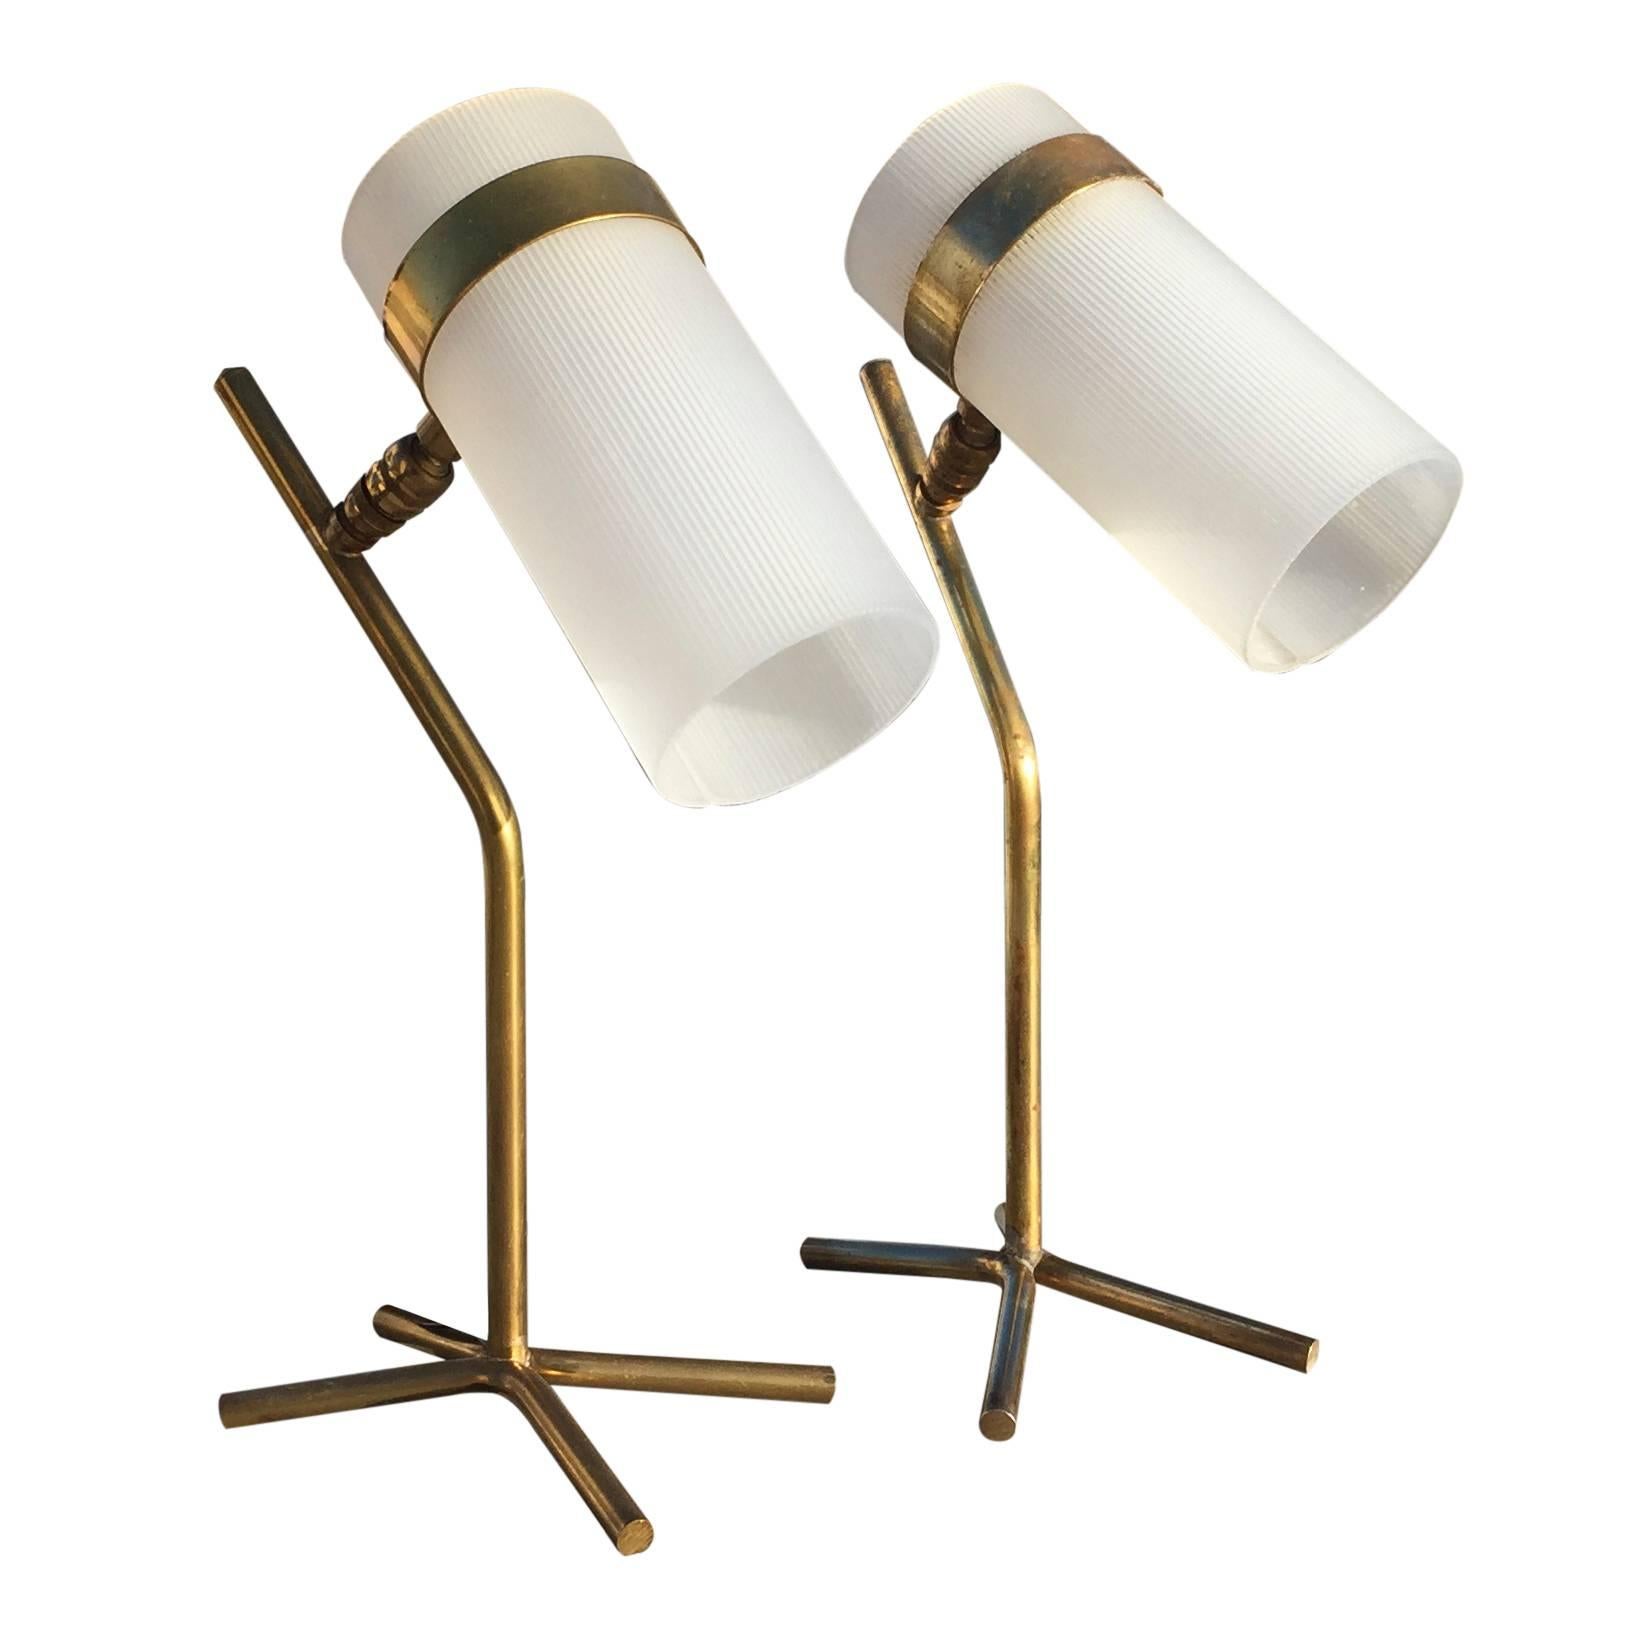 Rare Pair of Petite Plexiglas and Brass Table Lamps, France, 1950s